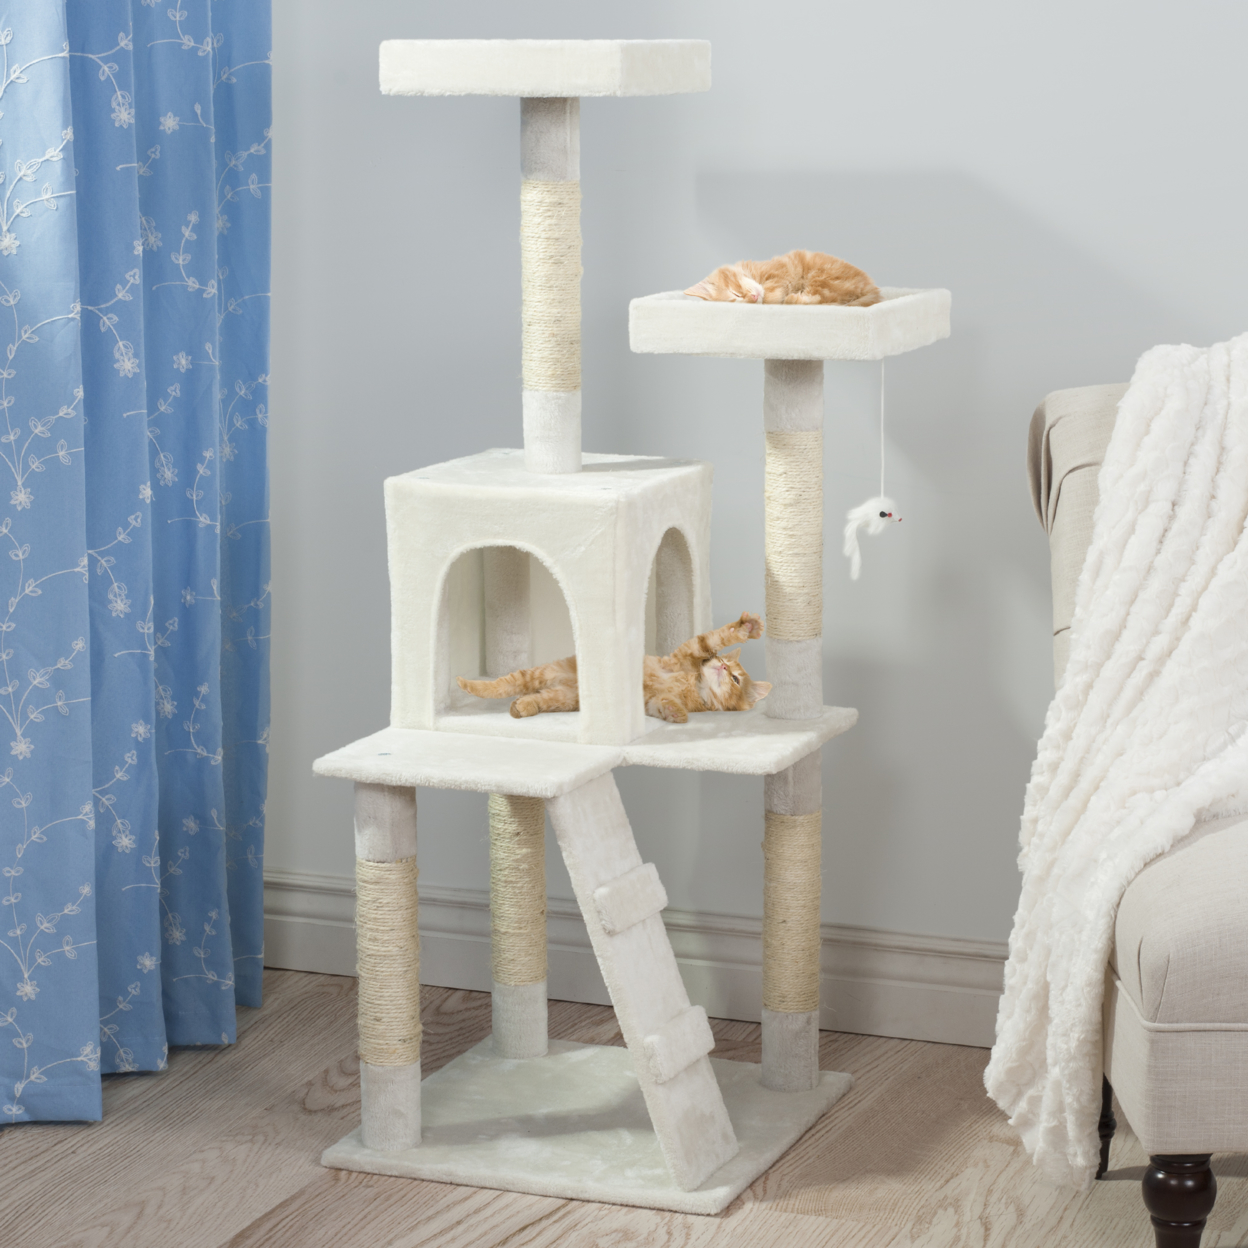 PETMAKER Penthouse Sleep And Play Cat Tree - 4 Ft Tall - White